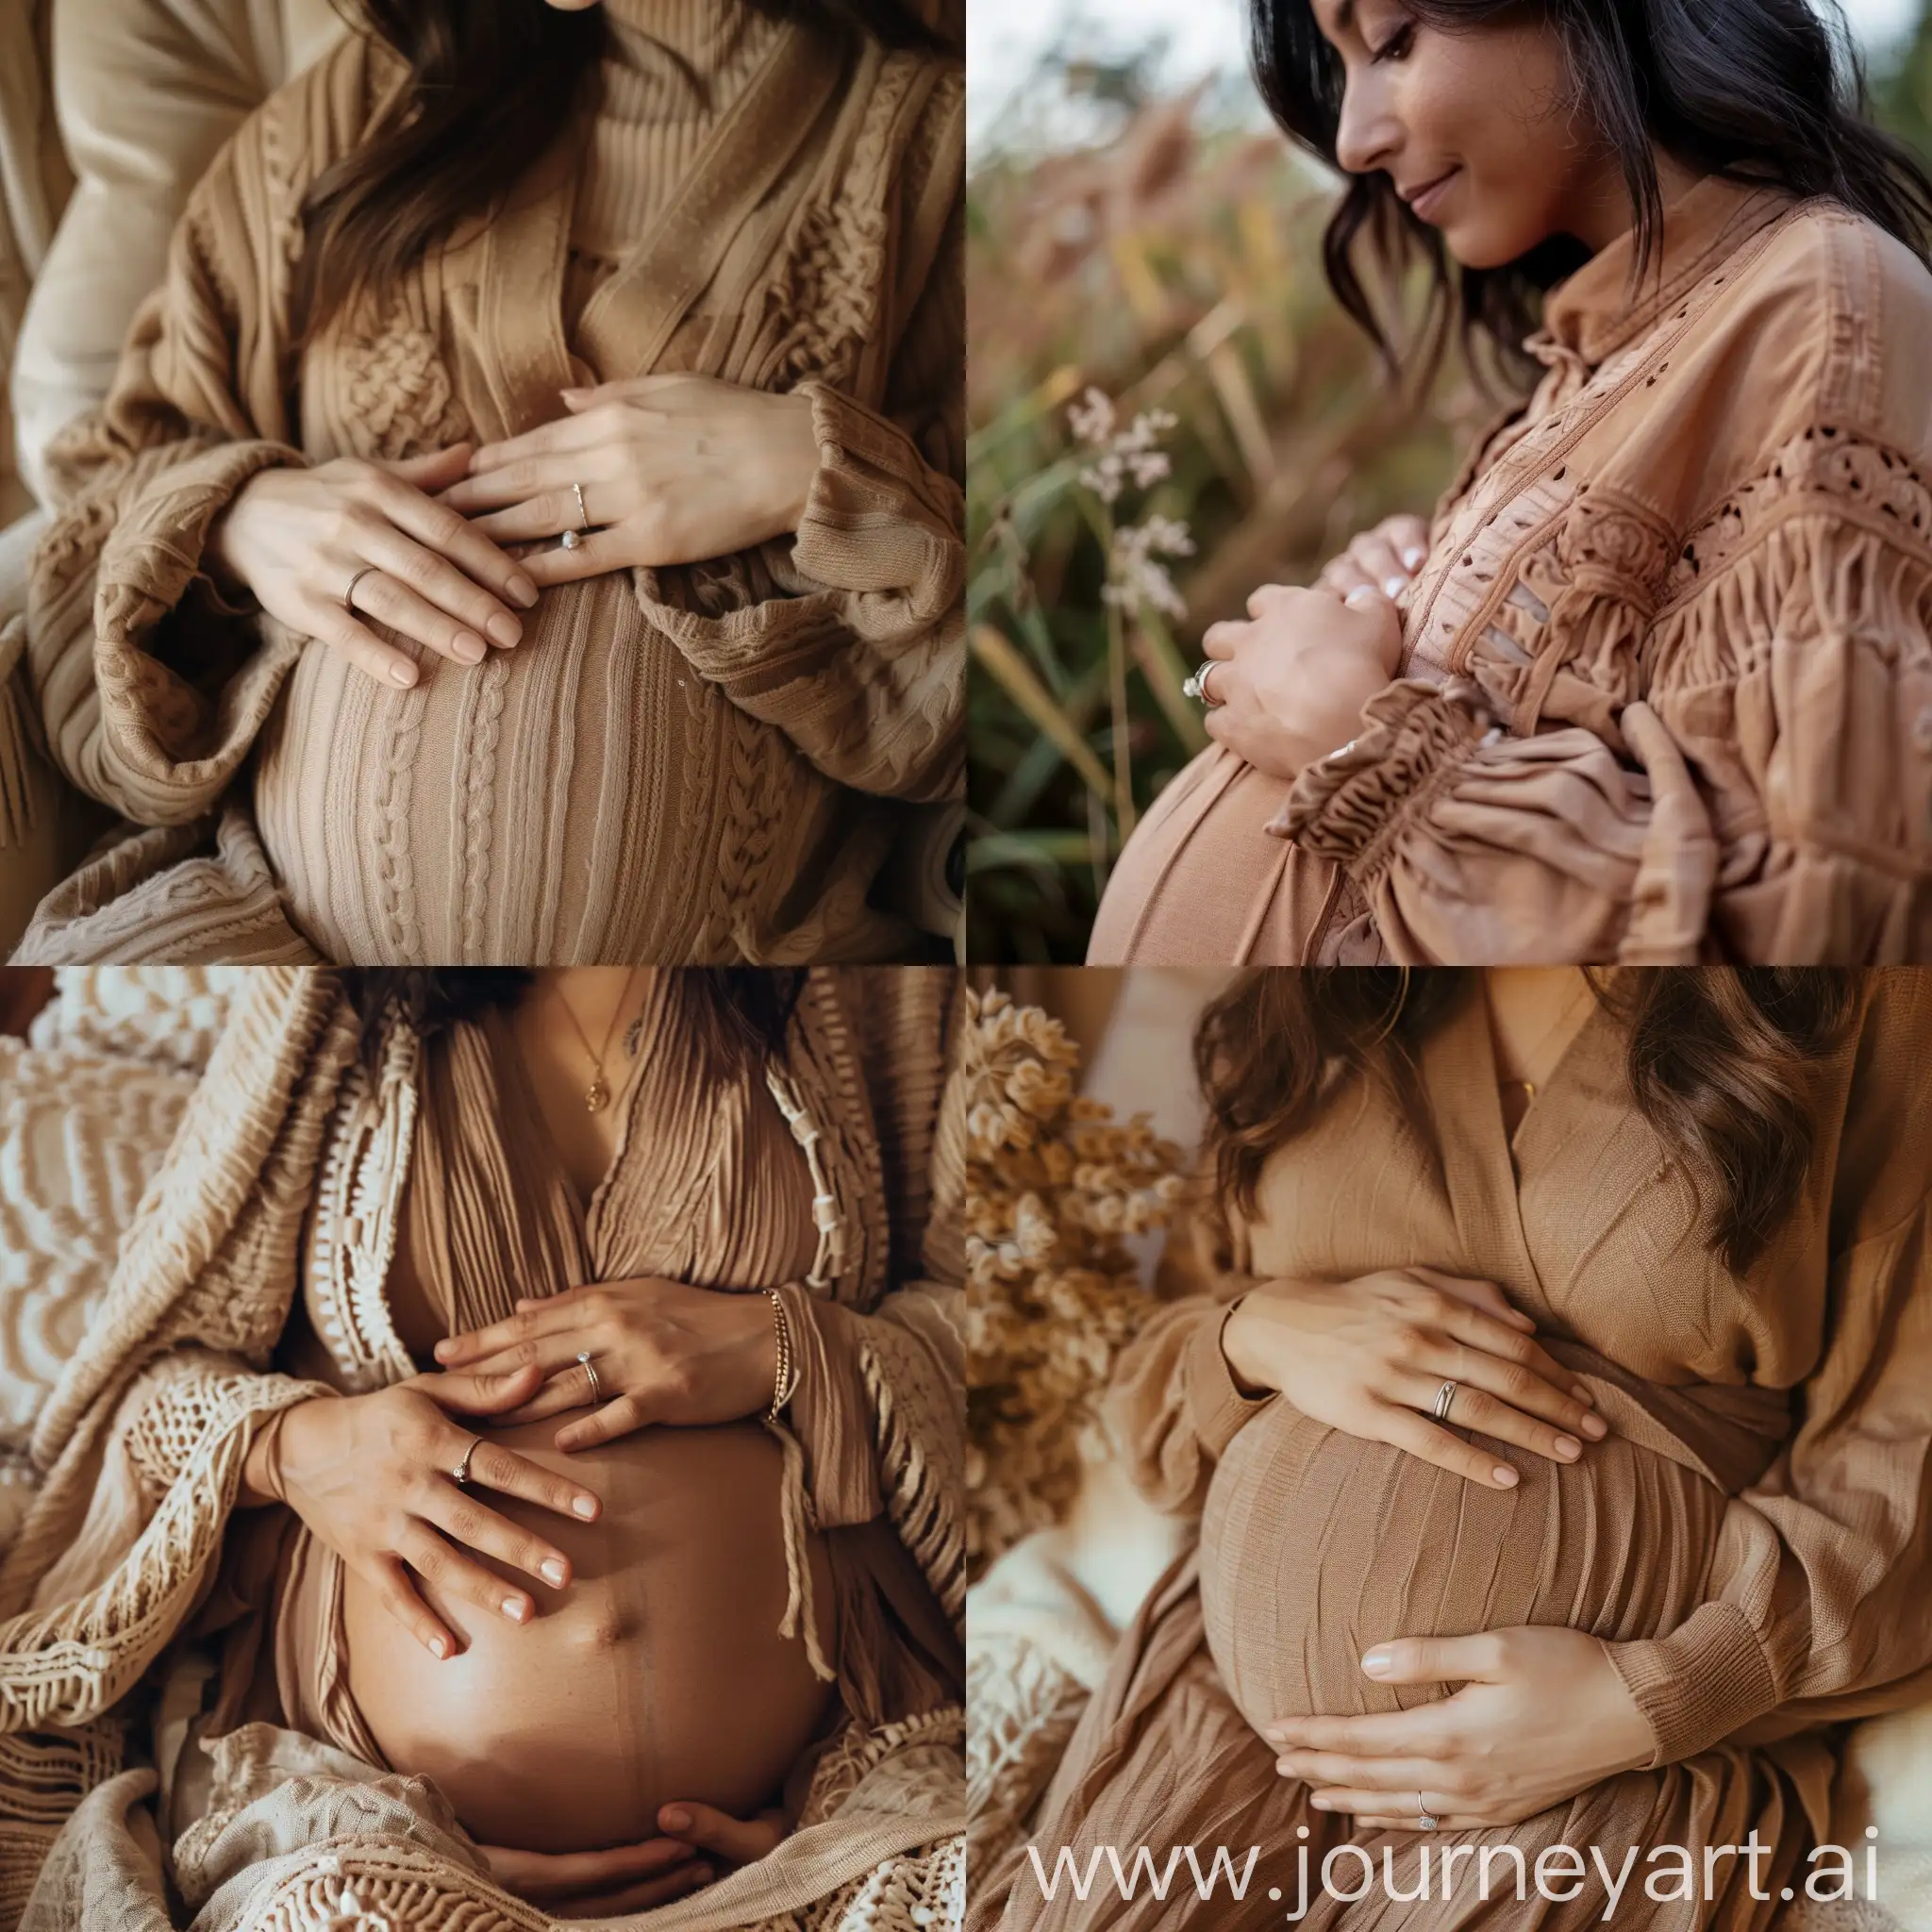 Aesthetic instagram photograph of a pregnant Middle School teacher, resting her hands on her belly, natural folds, woman, mid 40's, soft brown clothing color tones, different ethnicities, wedding ring